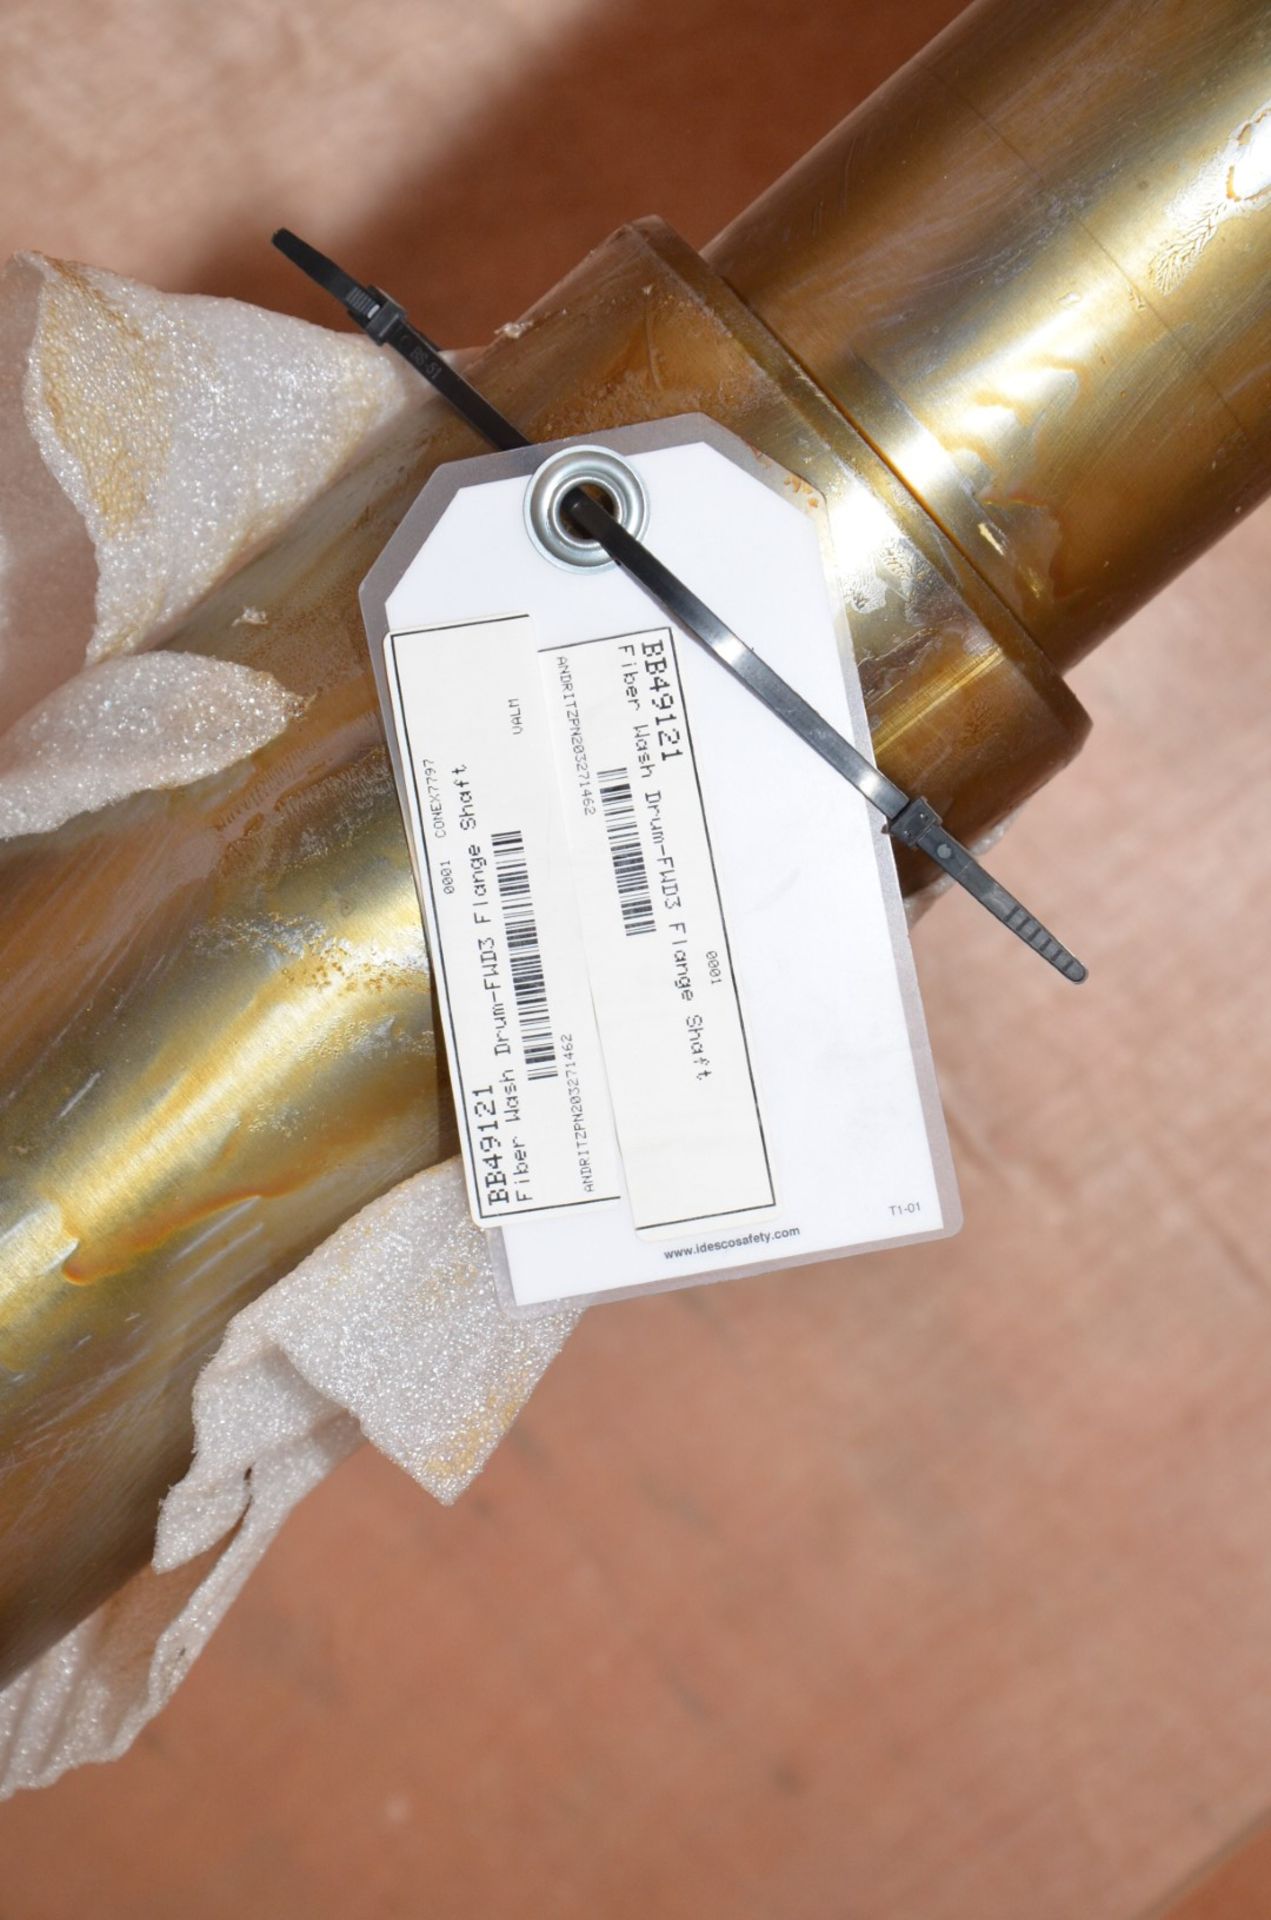 ANDRITZ MODUSCREEN T2D SPARE SHAFT [RIGGING FEE FOR LOT #84B - $25 USD PLUS APPLICABLE TAXES] - Image 4 of 4